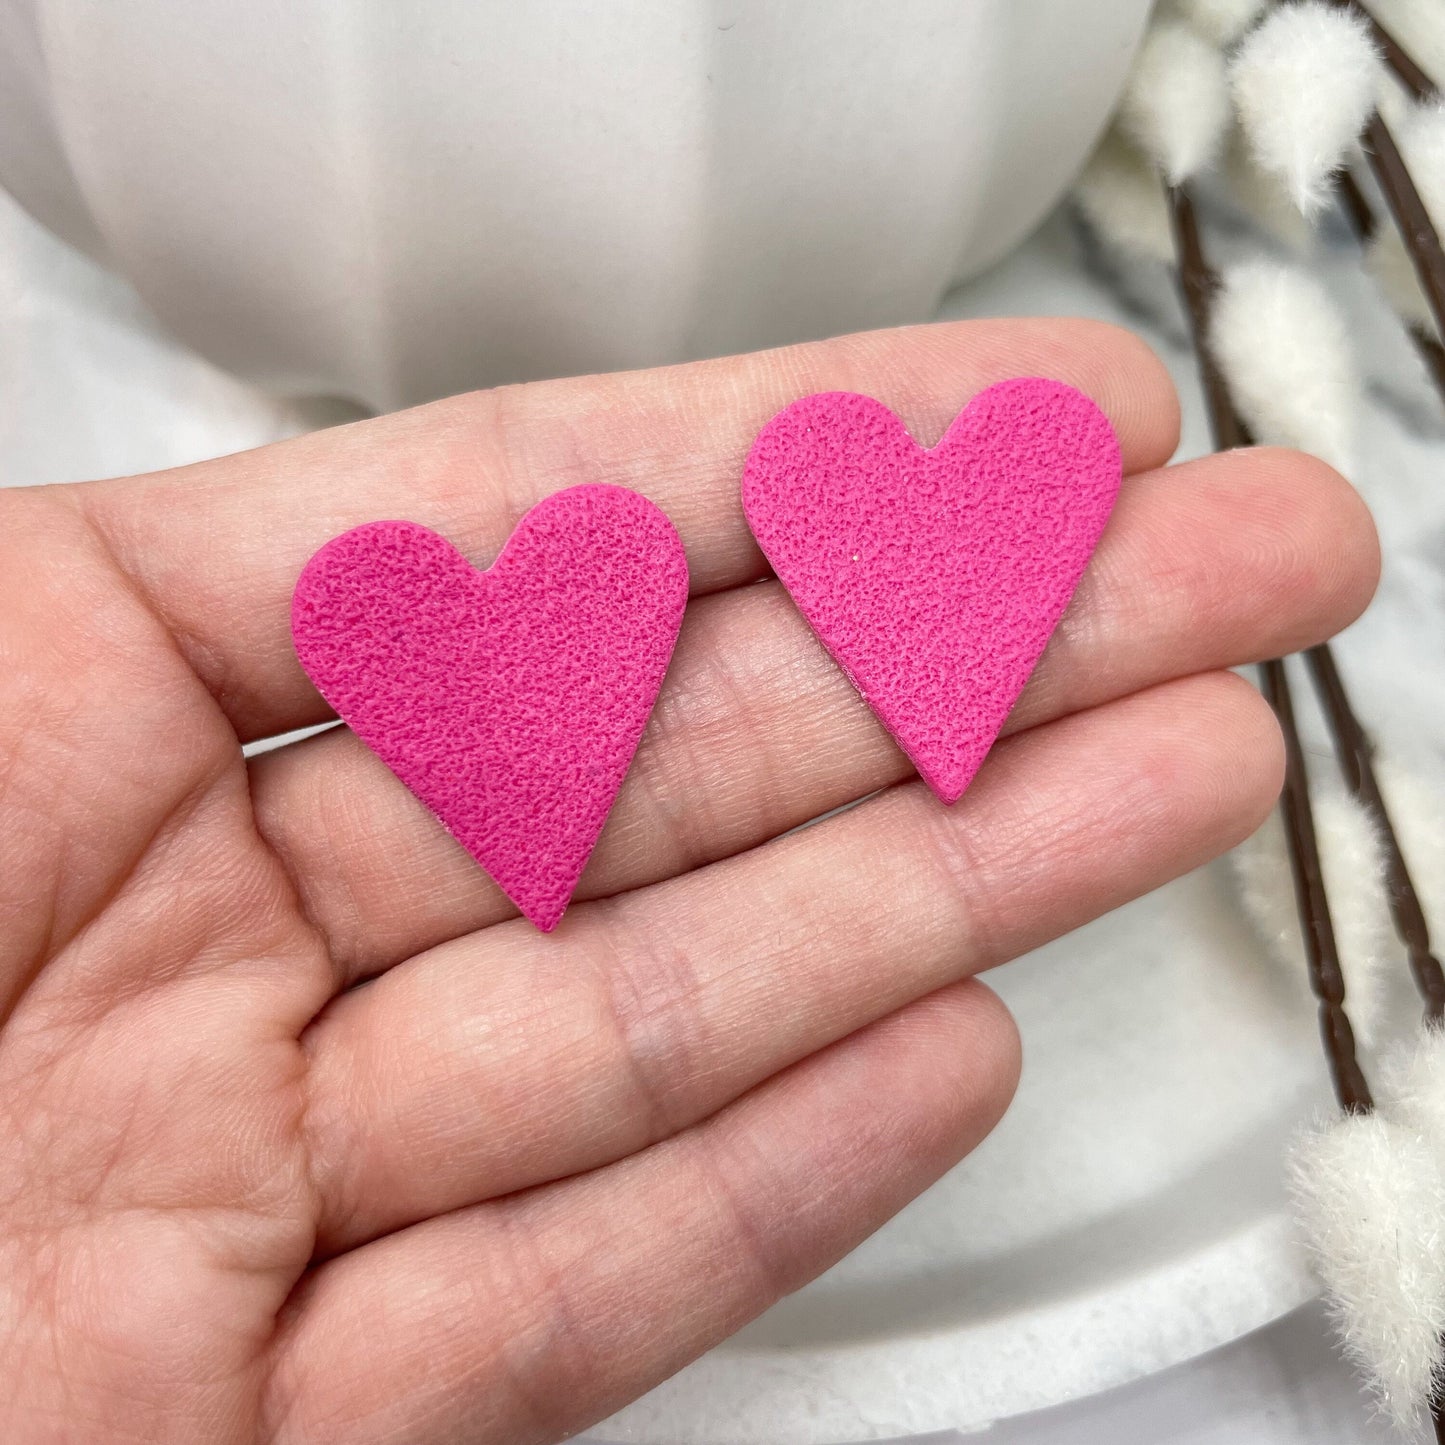 Heart earrings, polymer clay stud earrings, beautiful birthday gift, sister gift, girlfriend gift, valentines gift for her, galentine’s gift